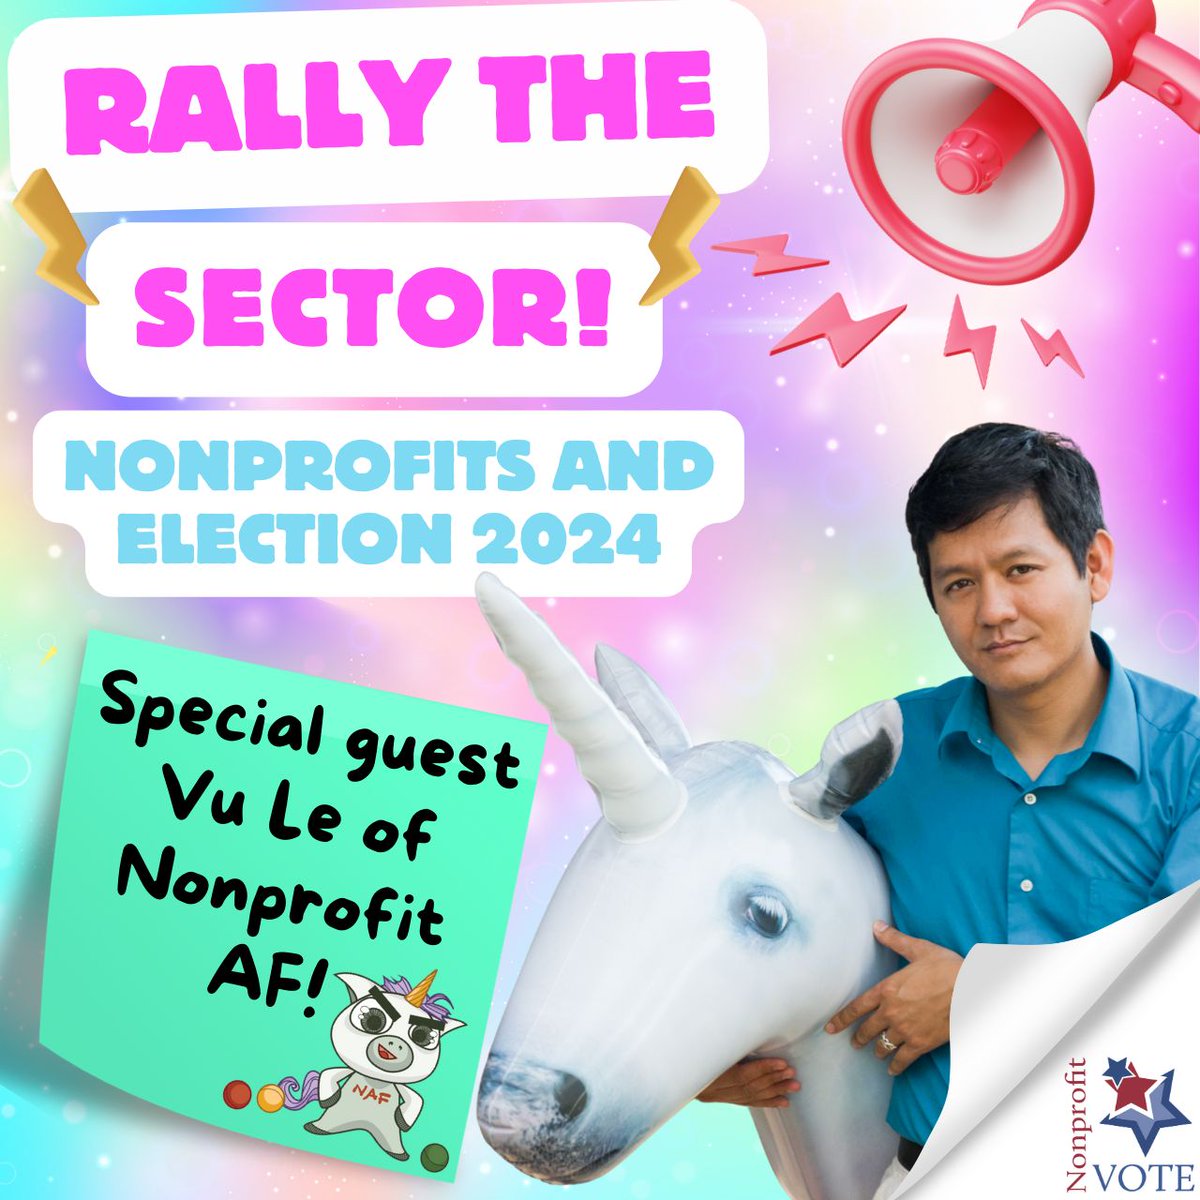 Harness the awesome voter engagement power of nonprofits by joining @NpVOTE & special guest Vu Le of @NonprofitAF for 'Rally the Sector: Nonprofits and Election 2024' on 3/28 at 1:00 p.m. central. Register here: bit.ly/4aFoPt1